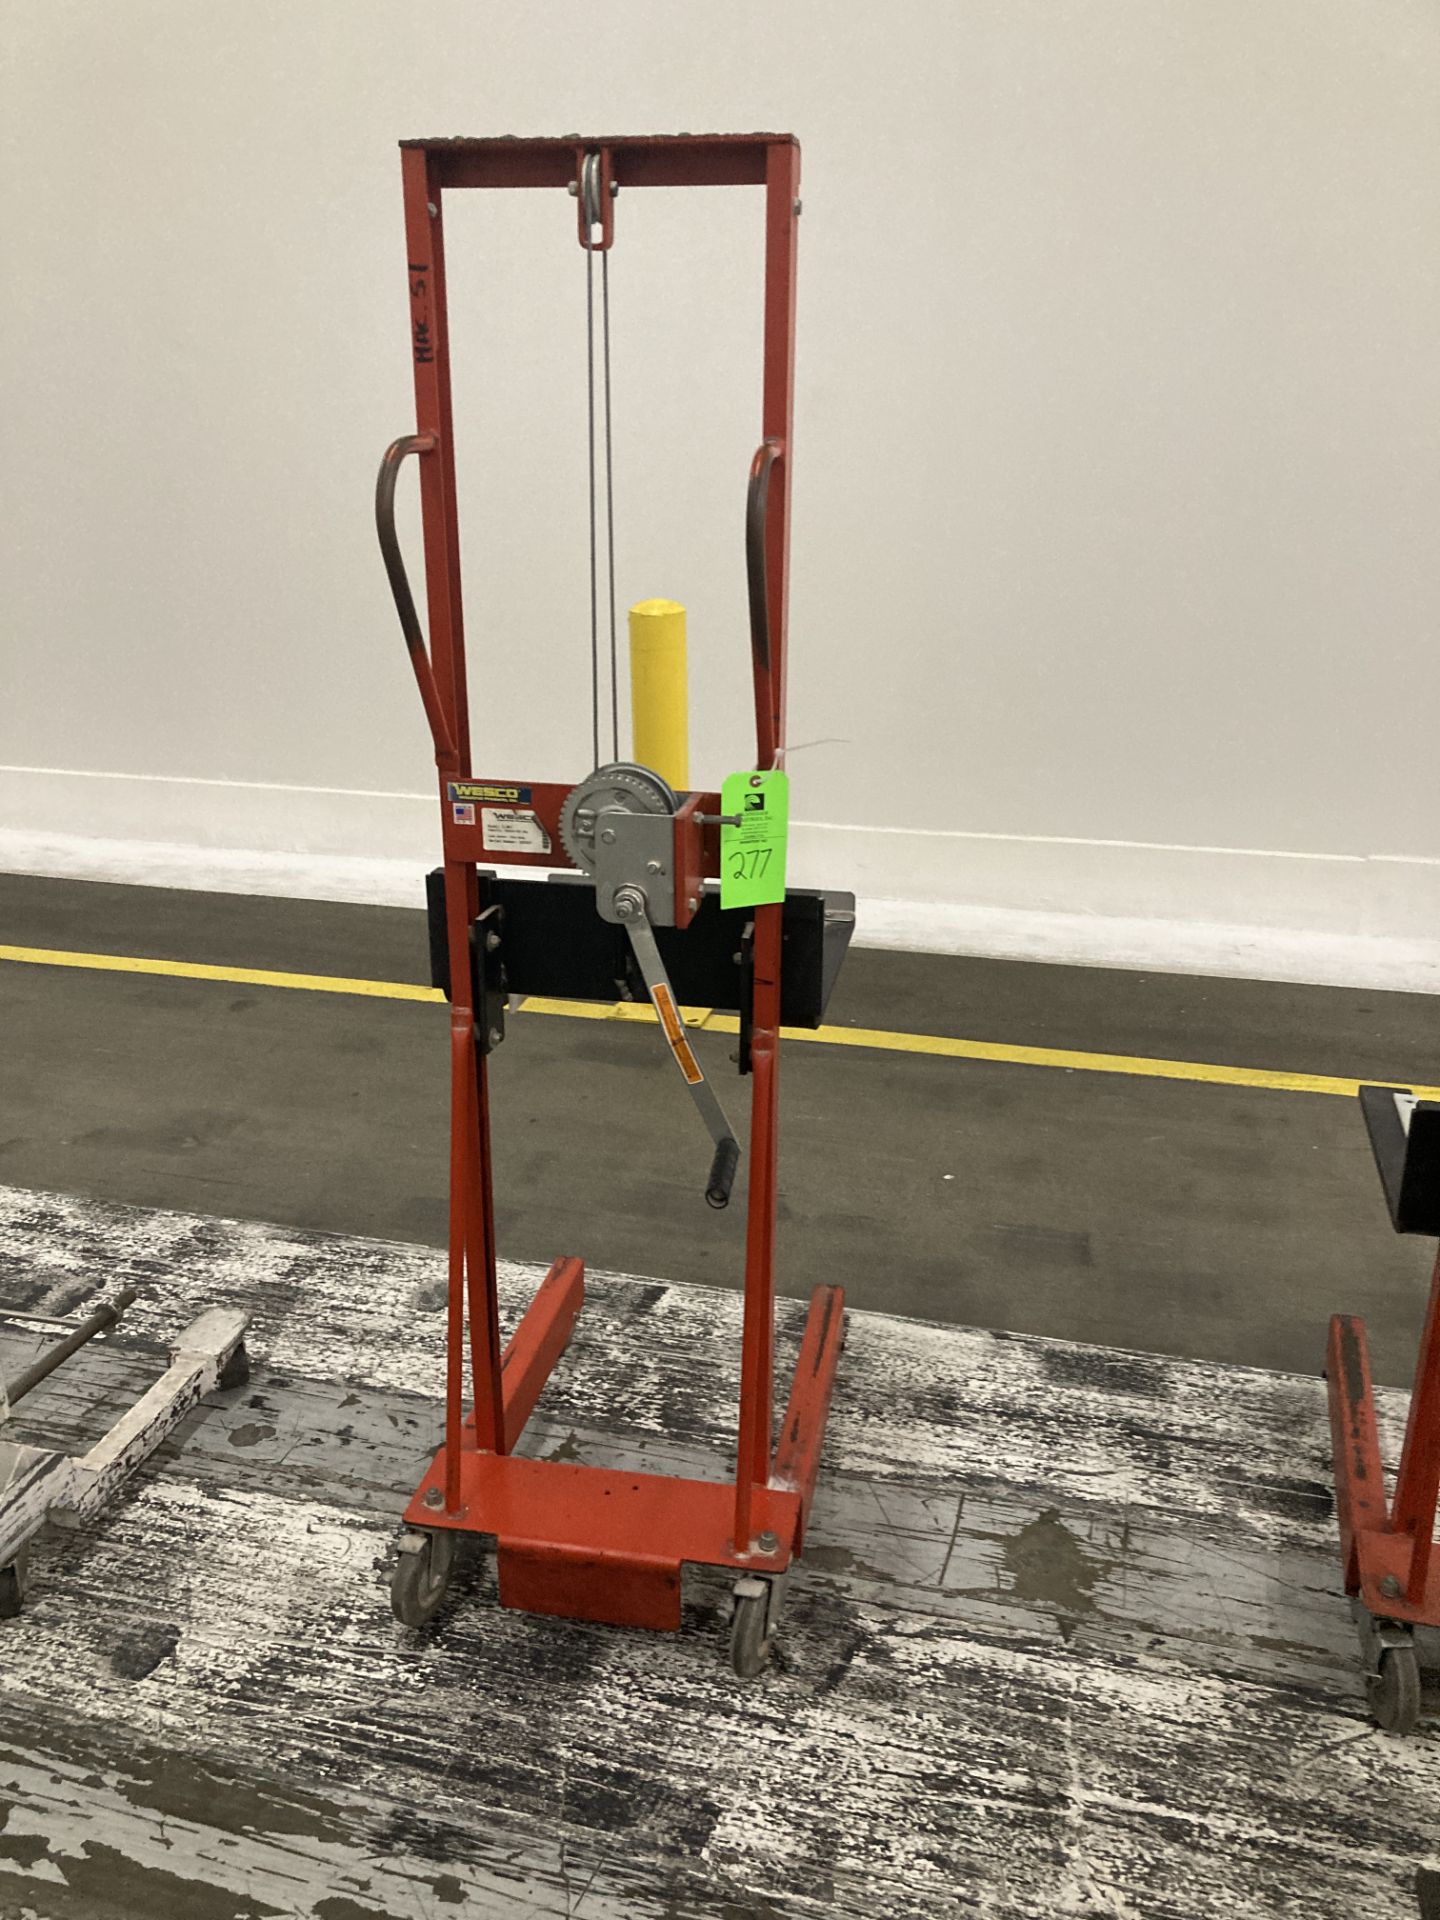 Wesco hand operated lift truck with straddle legs, approx. 500 lbs cap Rigging Fee: $ 50